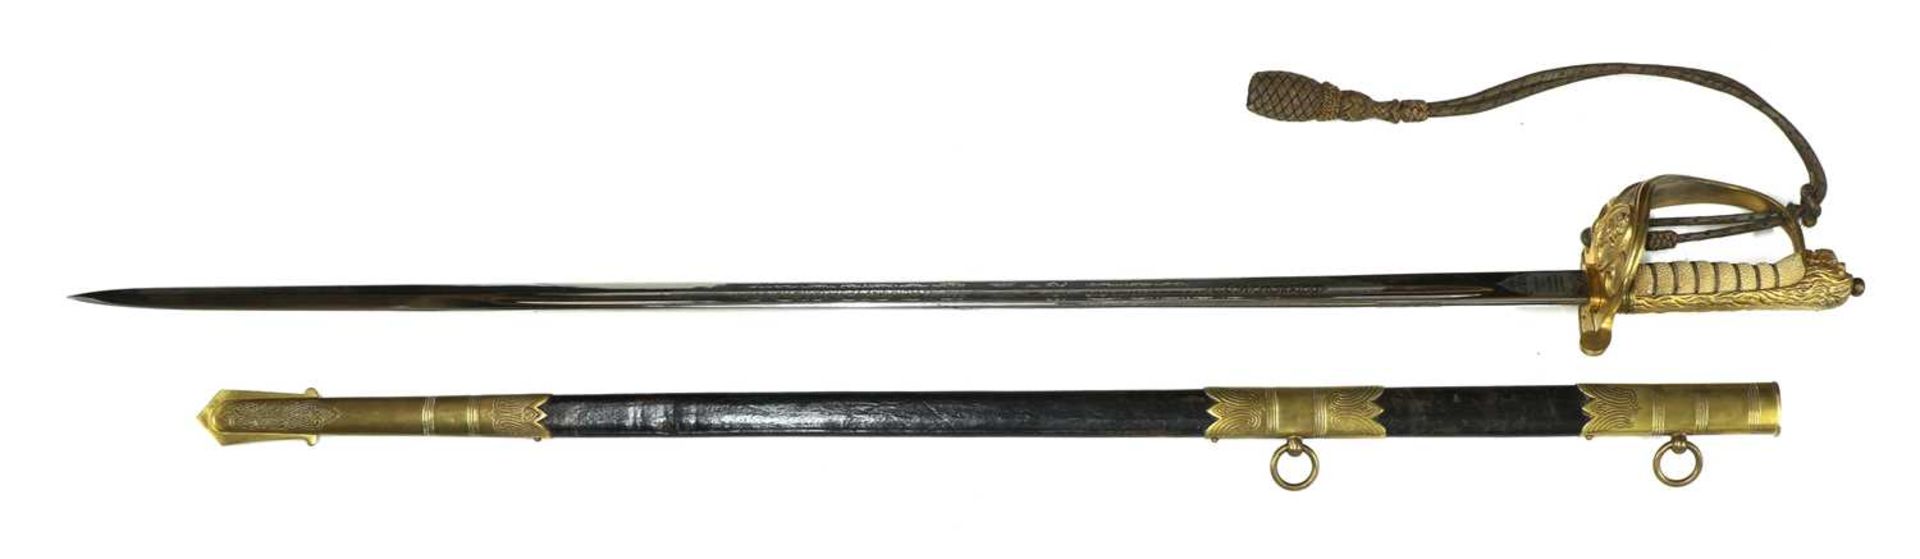 A George VI Royal Navy officer's sword, - Image 4 of 9